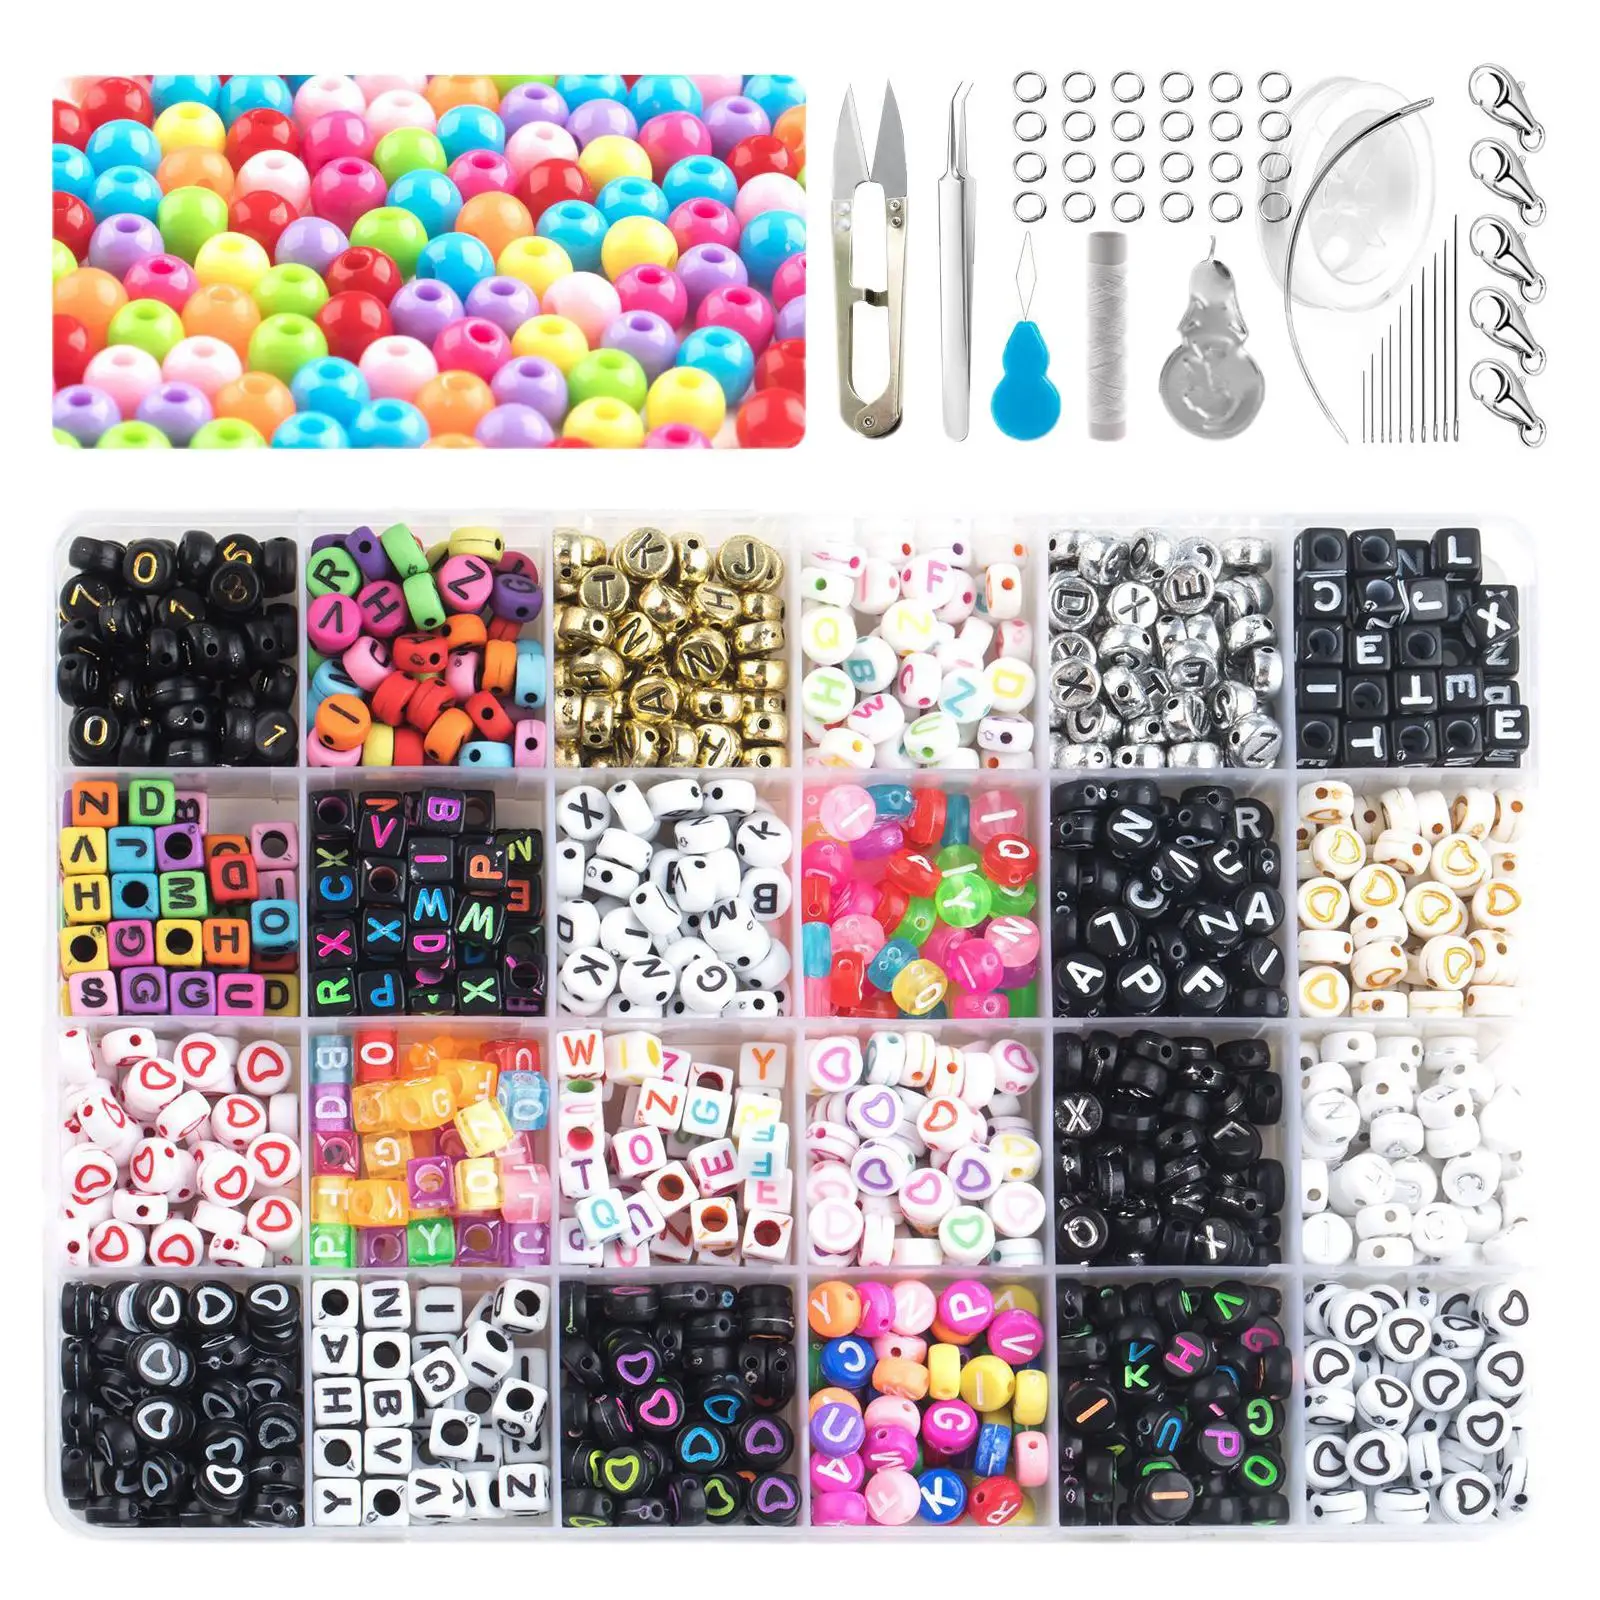 Alphabet Letter Beads 24 Grid Rainbow Craft Beads for Valentine`S Day Key Chains Graduation Colorful Crafting DIY Necklaces